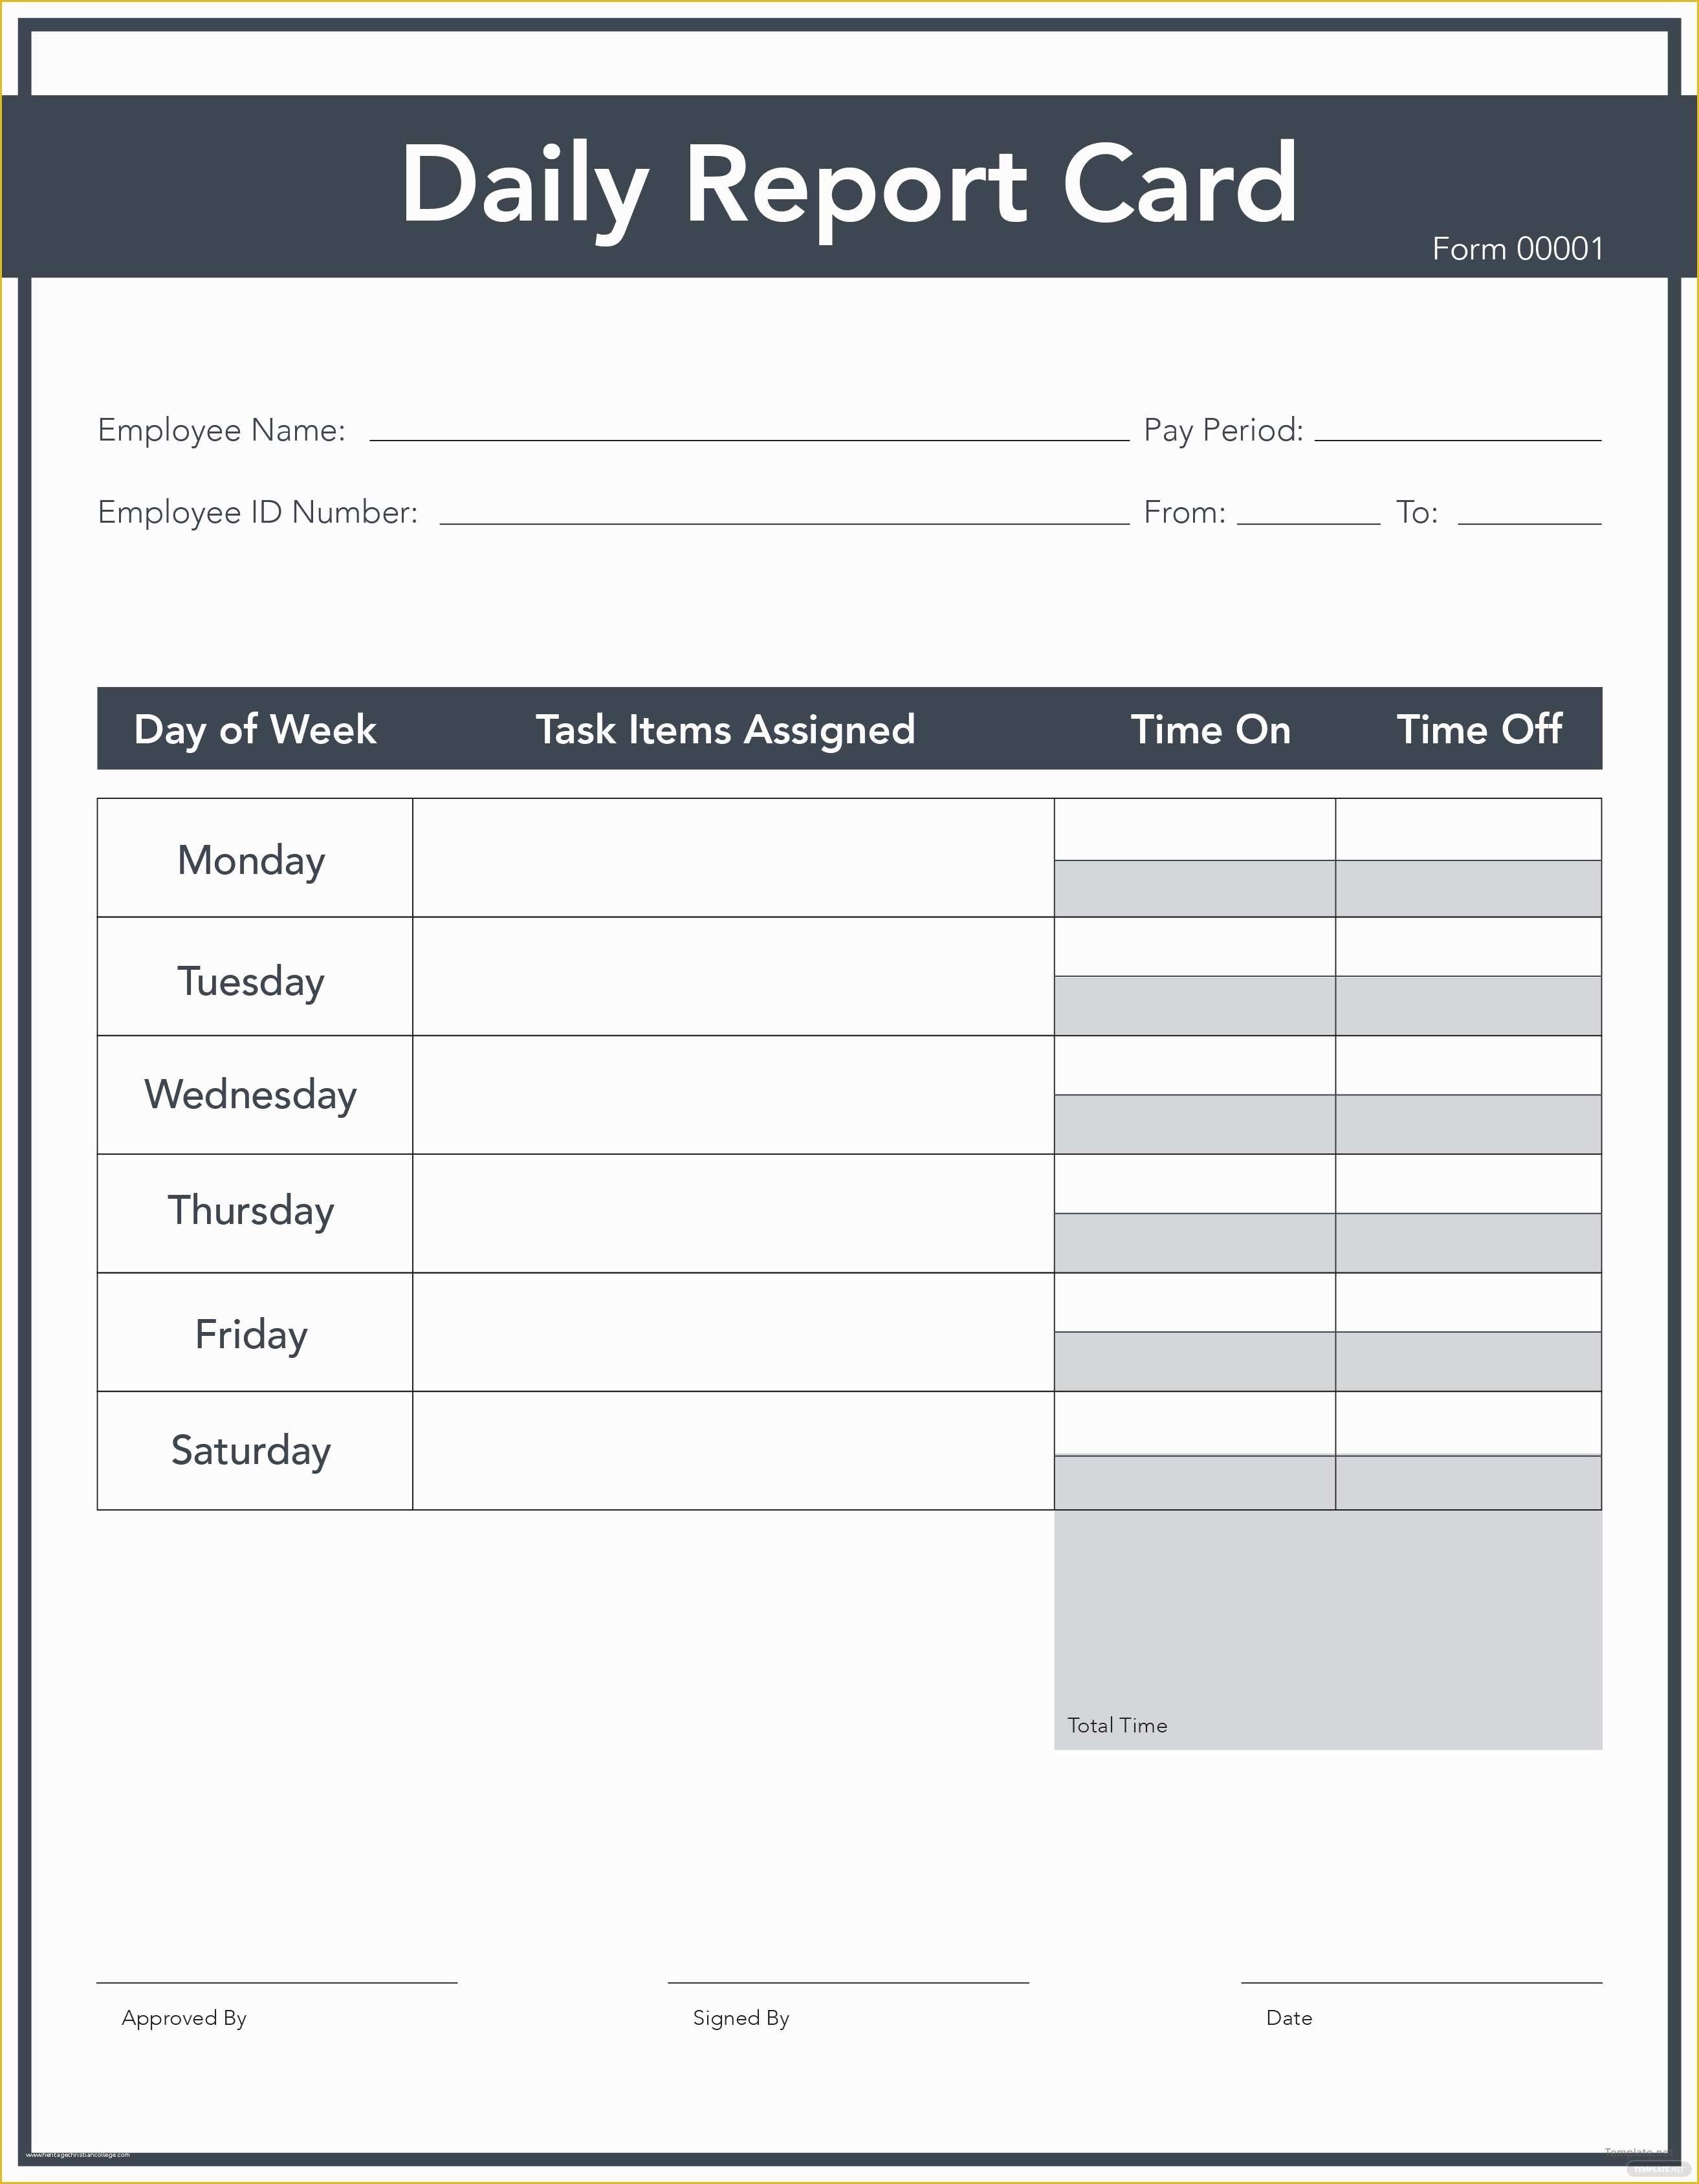 Free Daily Sales Report Template Of Free Daily Report Card Template In Adobe Shop Adobe